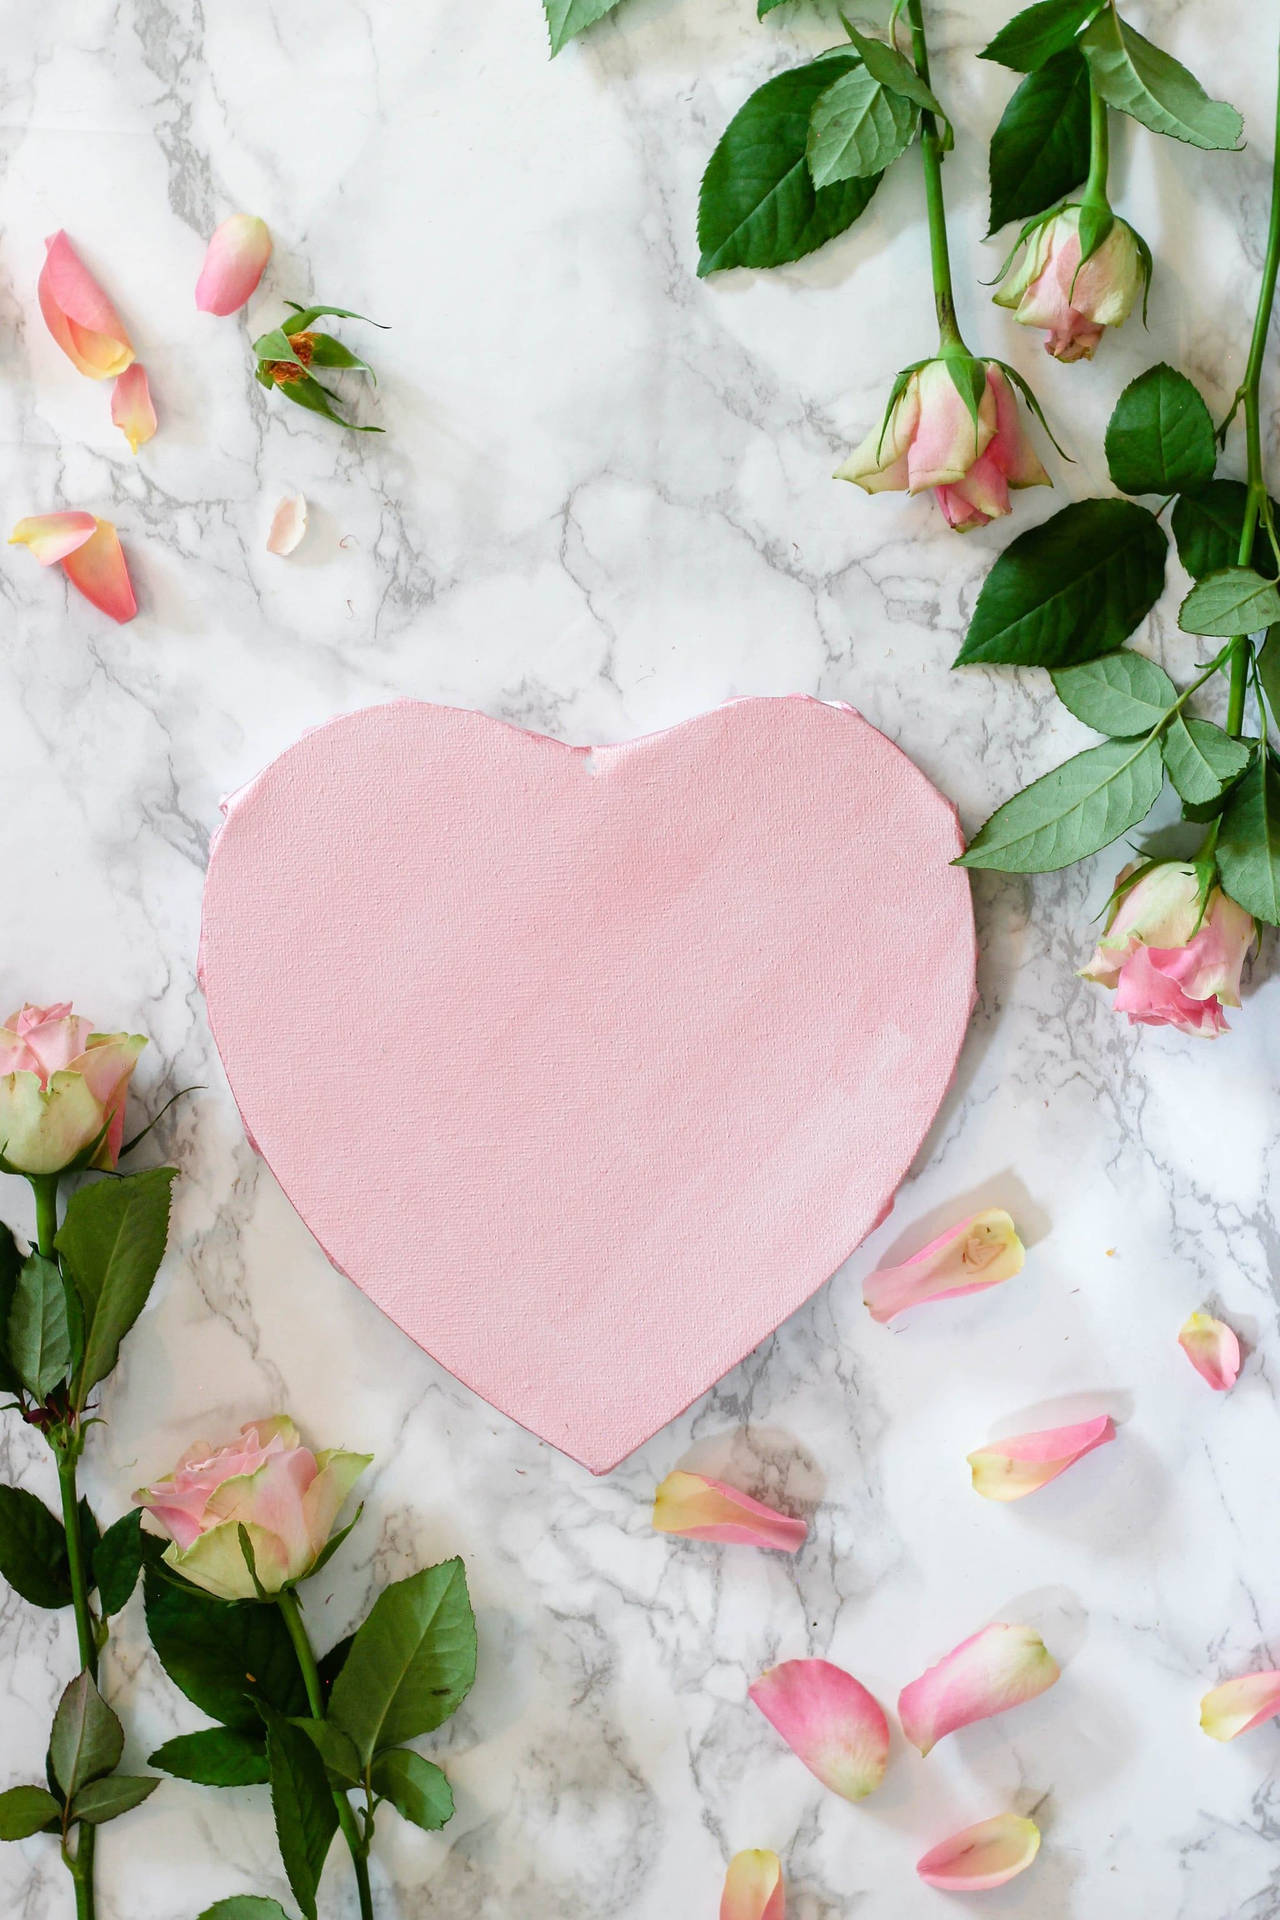 Pastel Pink Heart Plate With Roses Wallpaper